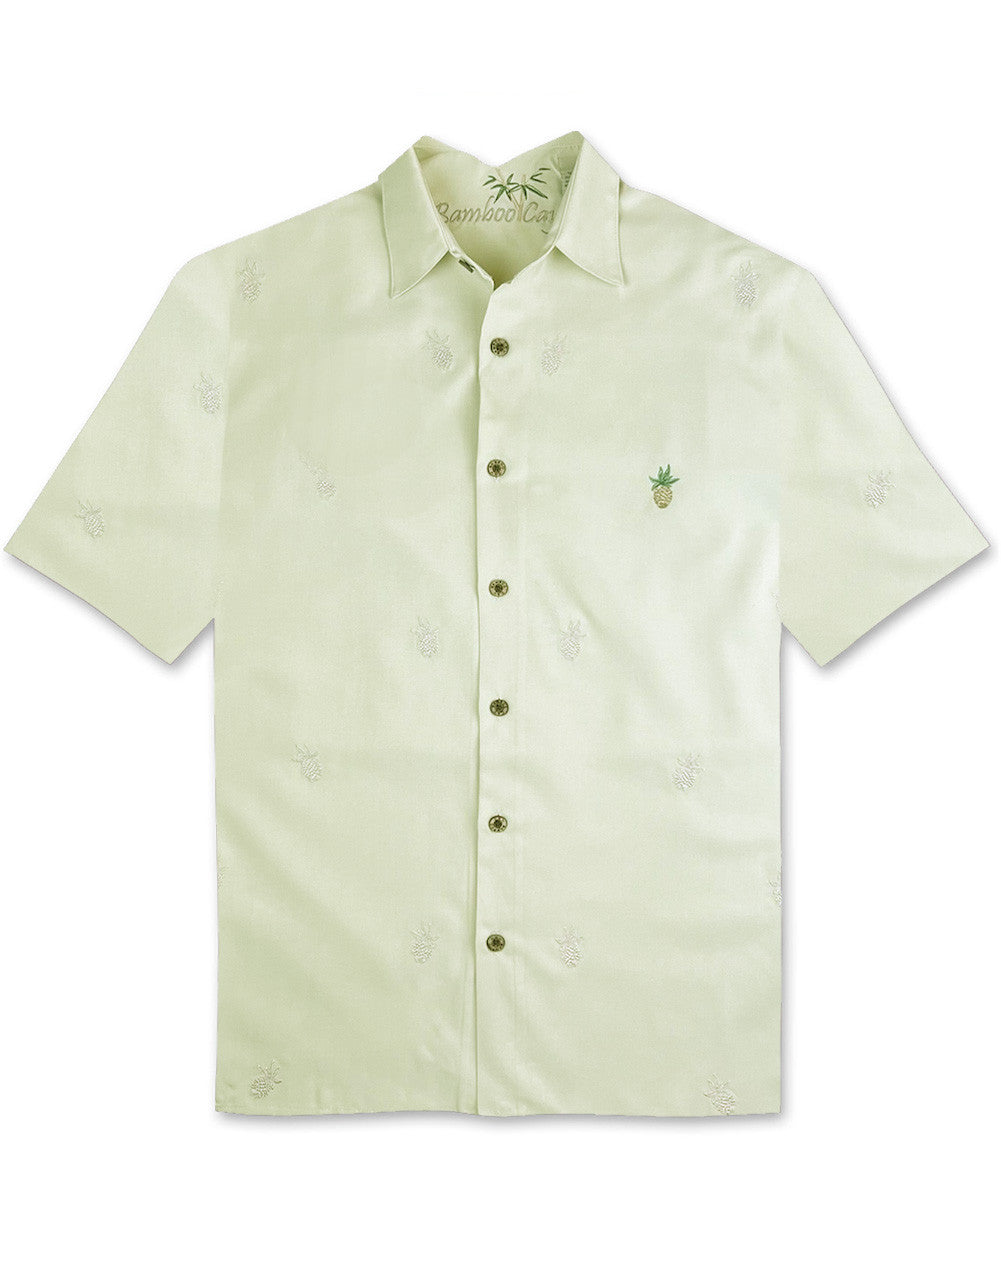 Pineapple Collection Embroidered Camp Shirt by Bamboo Cay